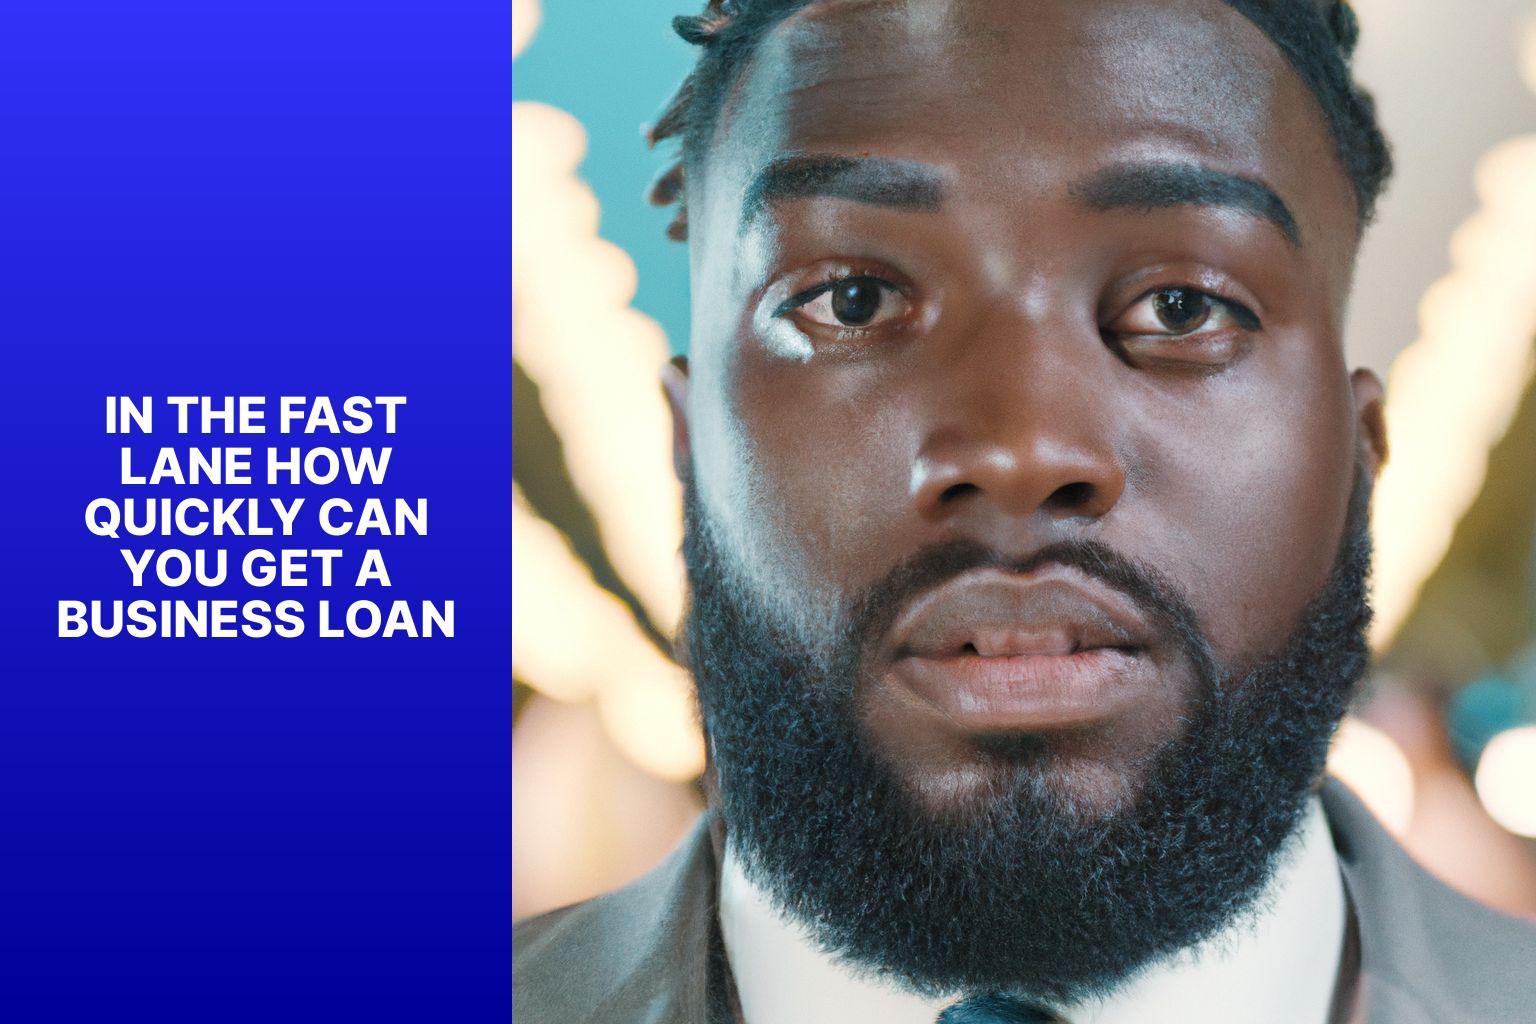 In the Fast Lane How Quickly Can You Get a Business Loan